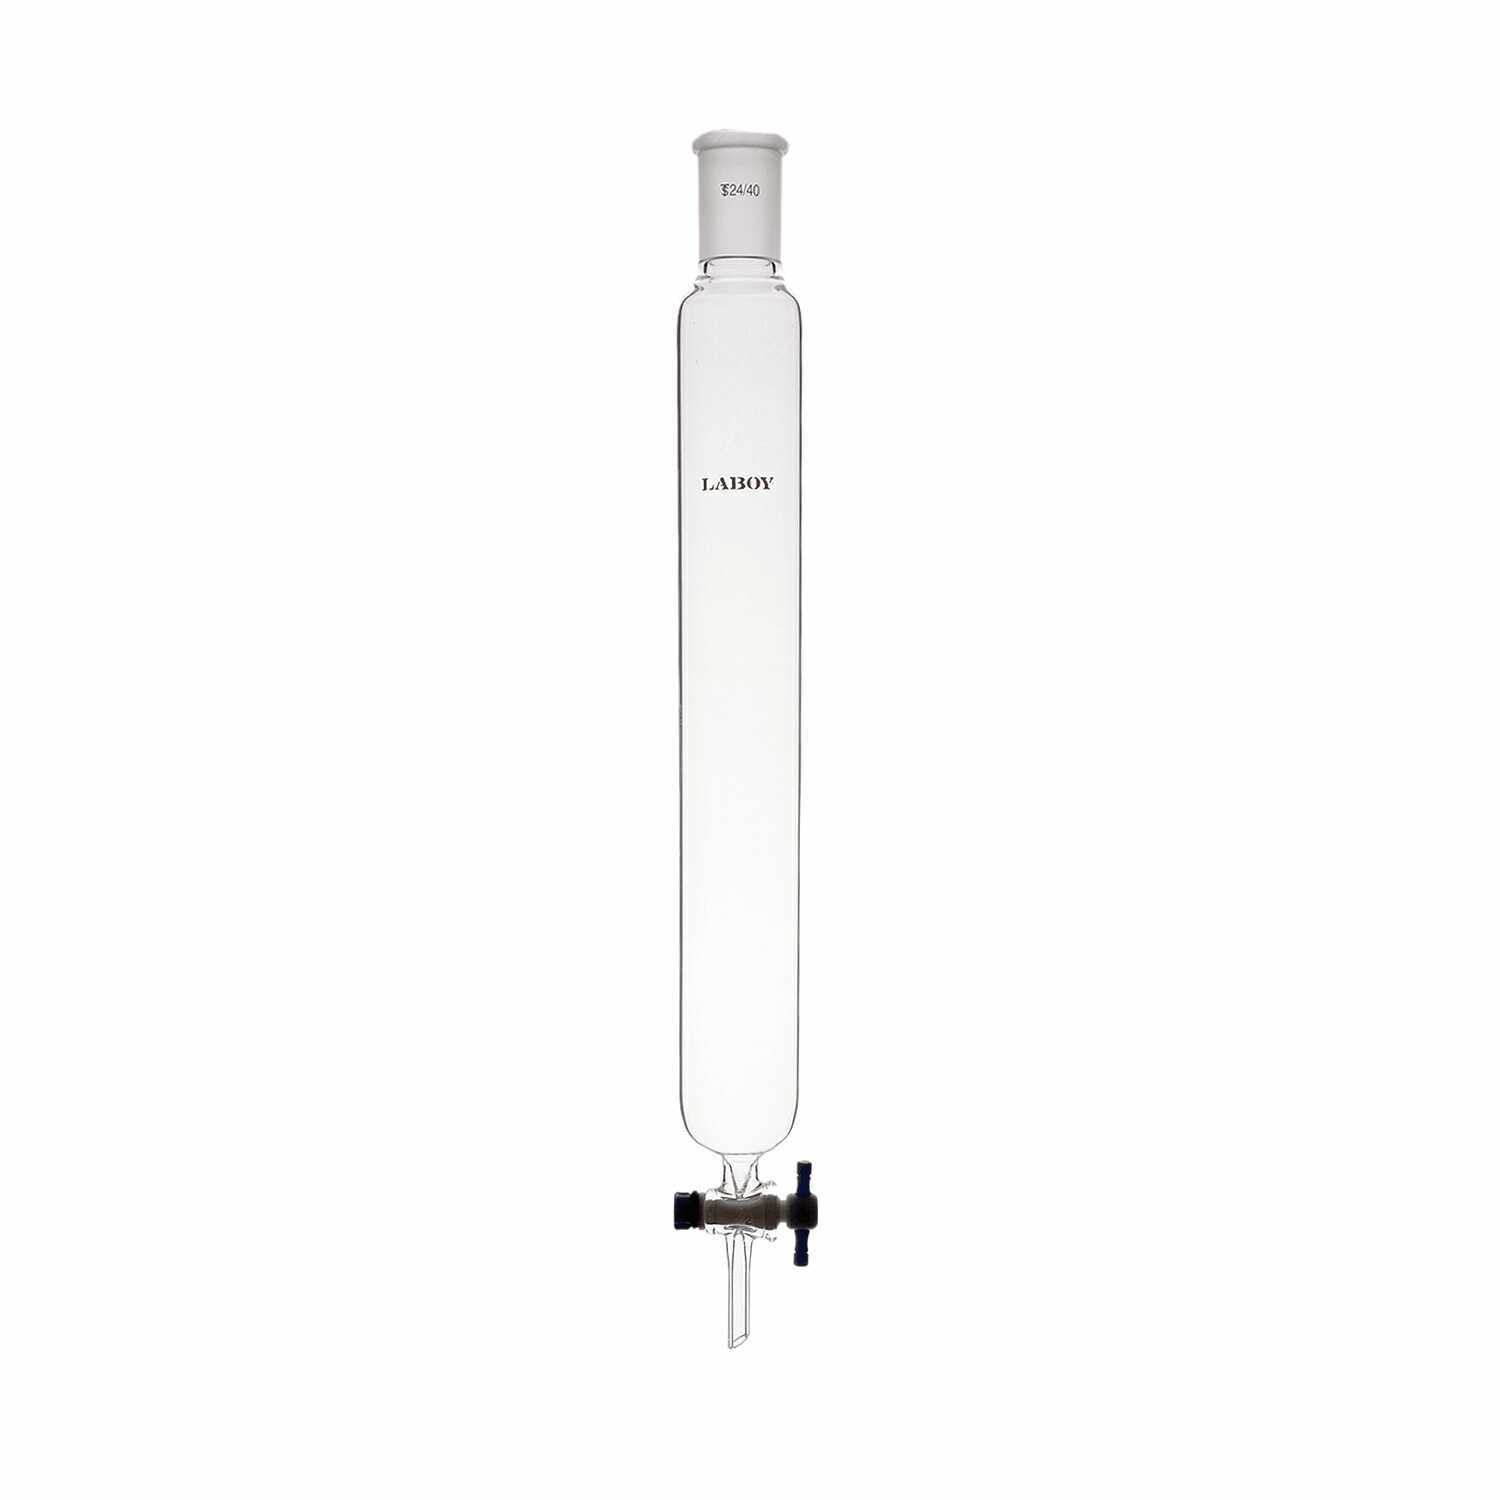 Glass Chromatography Column With PTFE Stopcock and Taper Joint - Scienmart